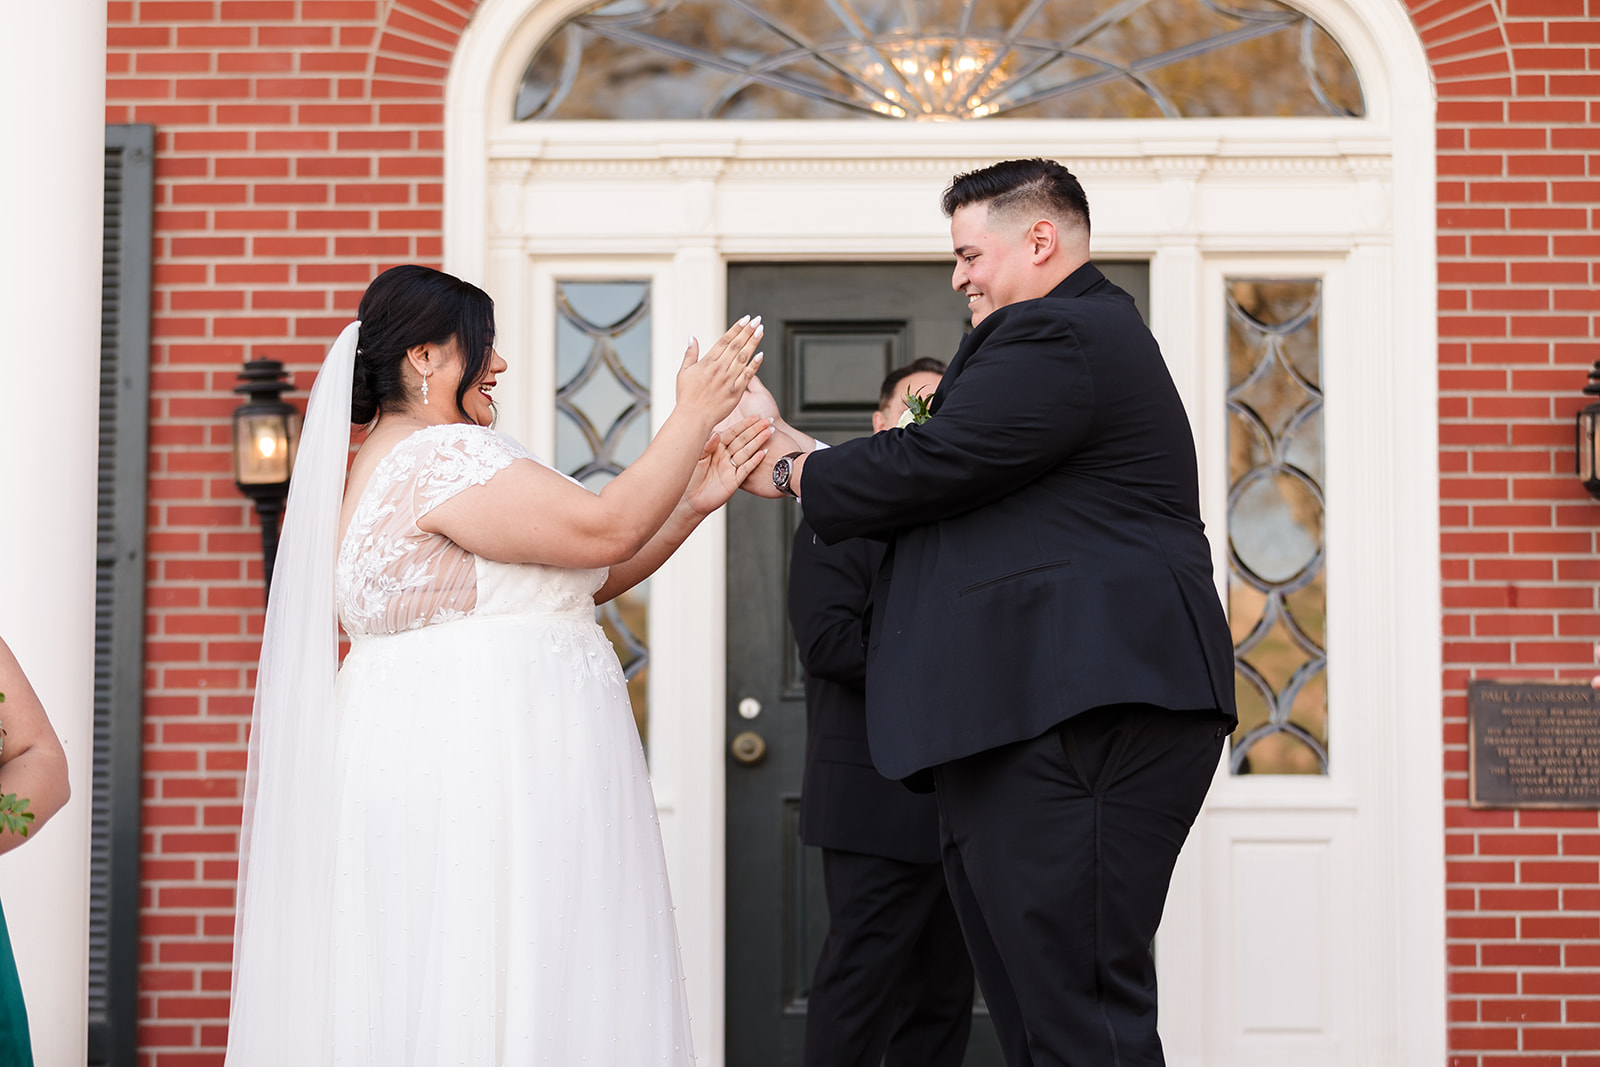 Bride and groom share a secret handshake after they exchange wedding rings